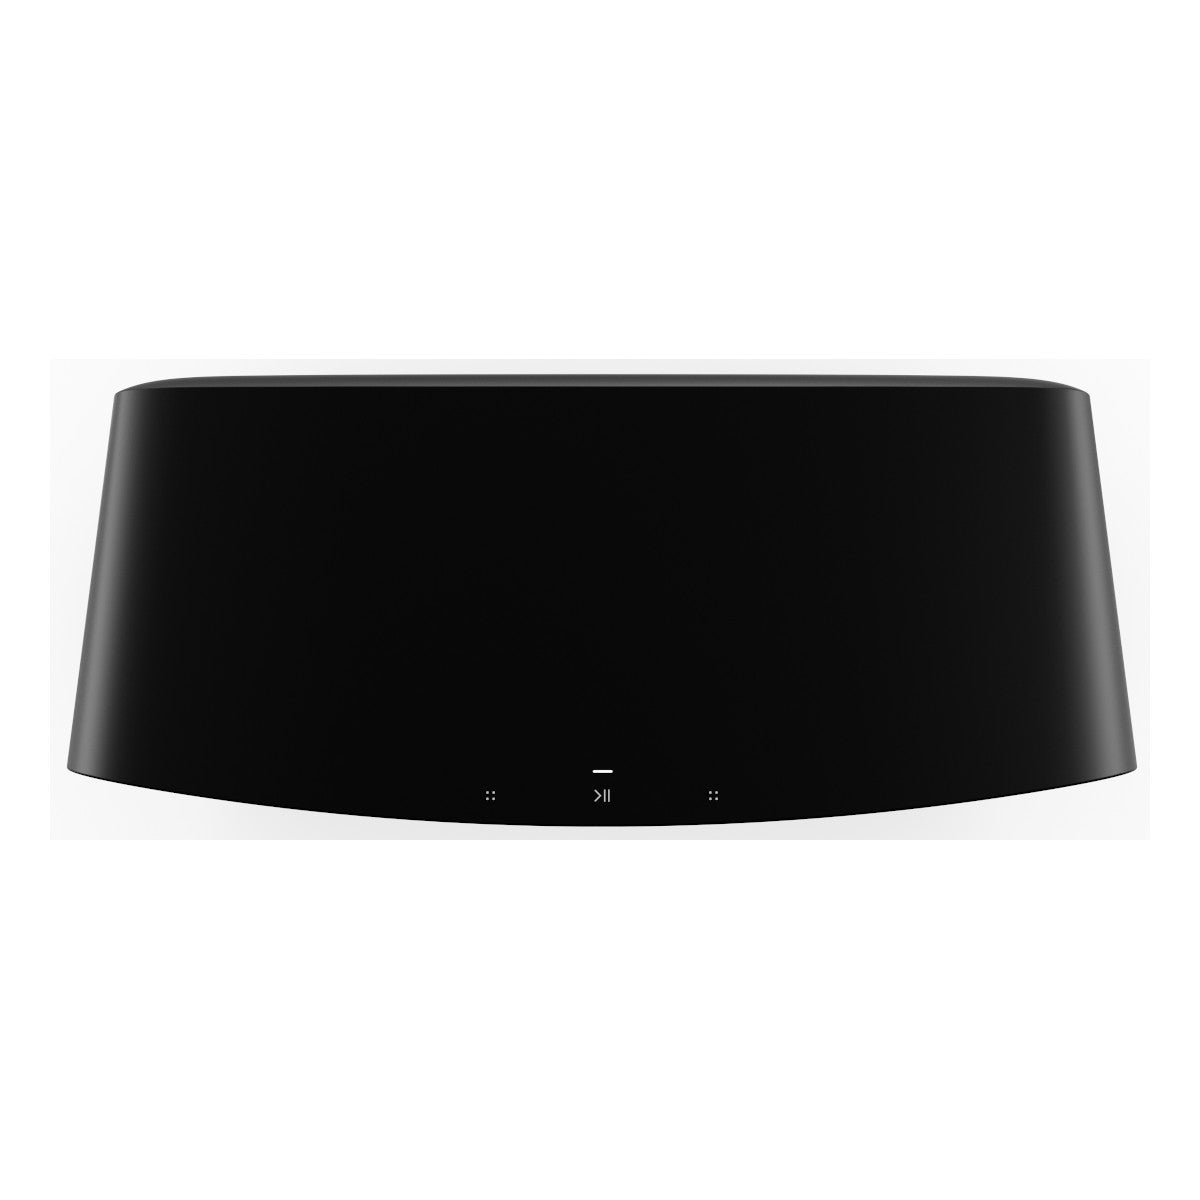 Victrola Stream Carbon Turntable with Pair of Sonos Five Wireless Speaker for Streaming Music (Black)